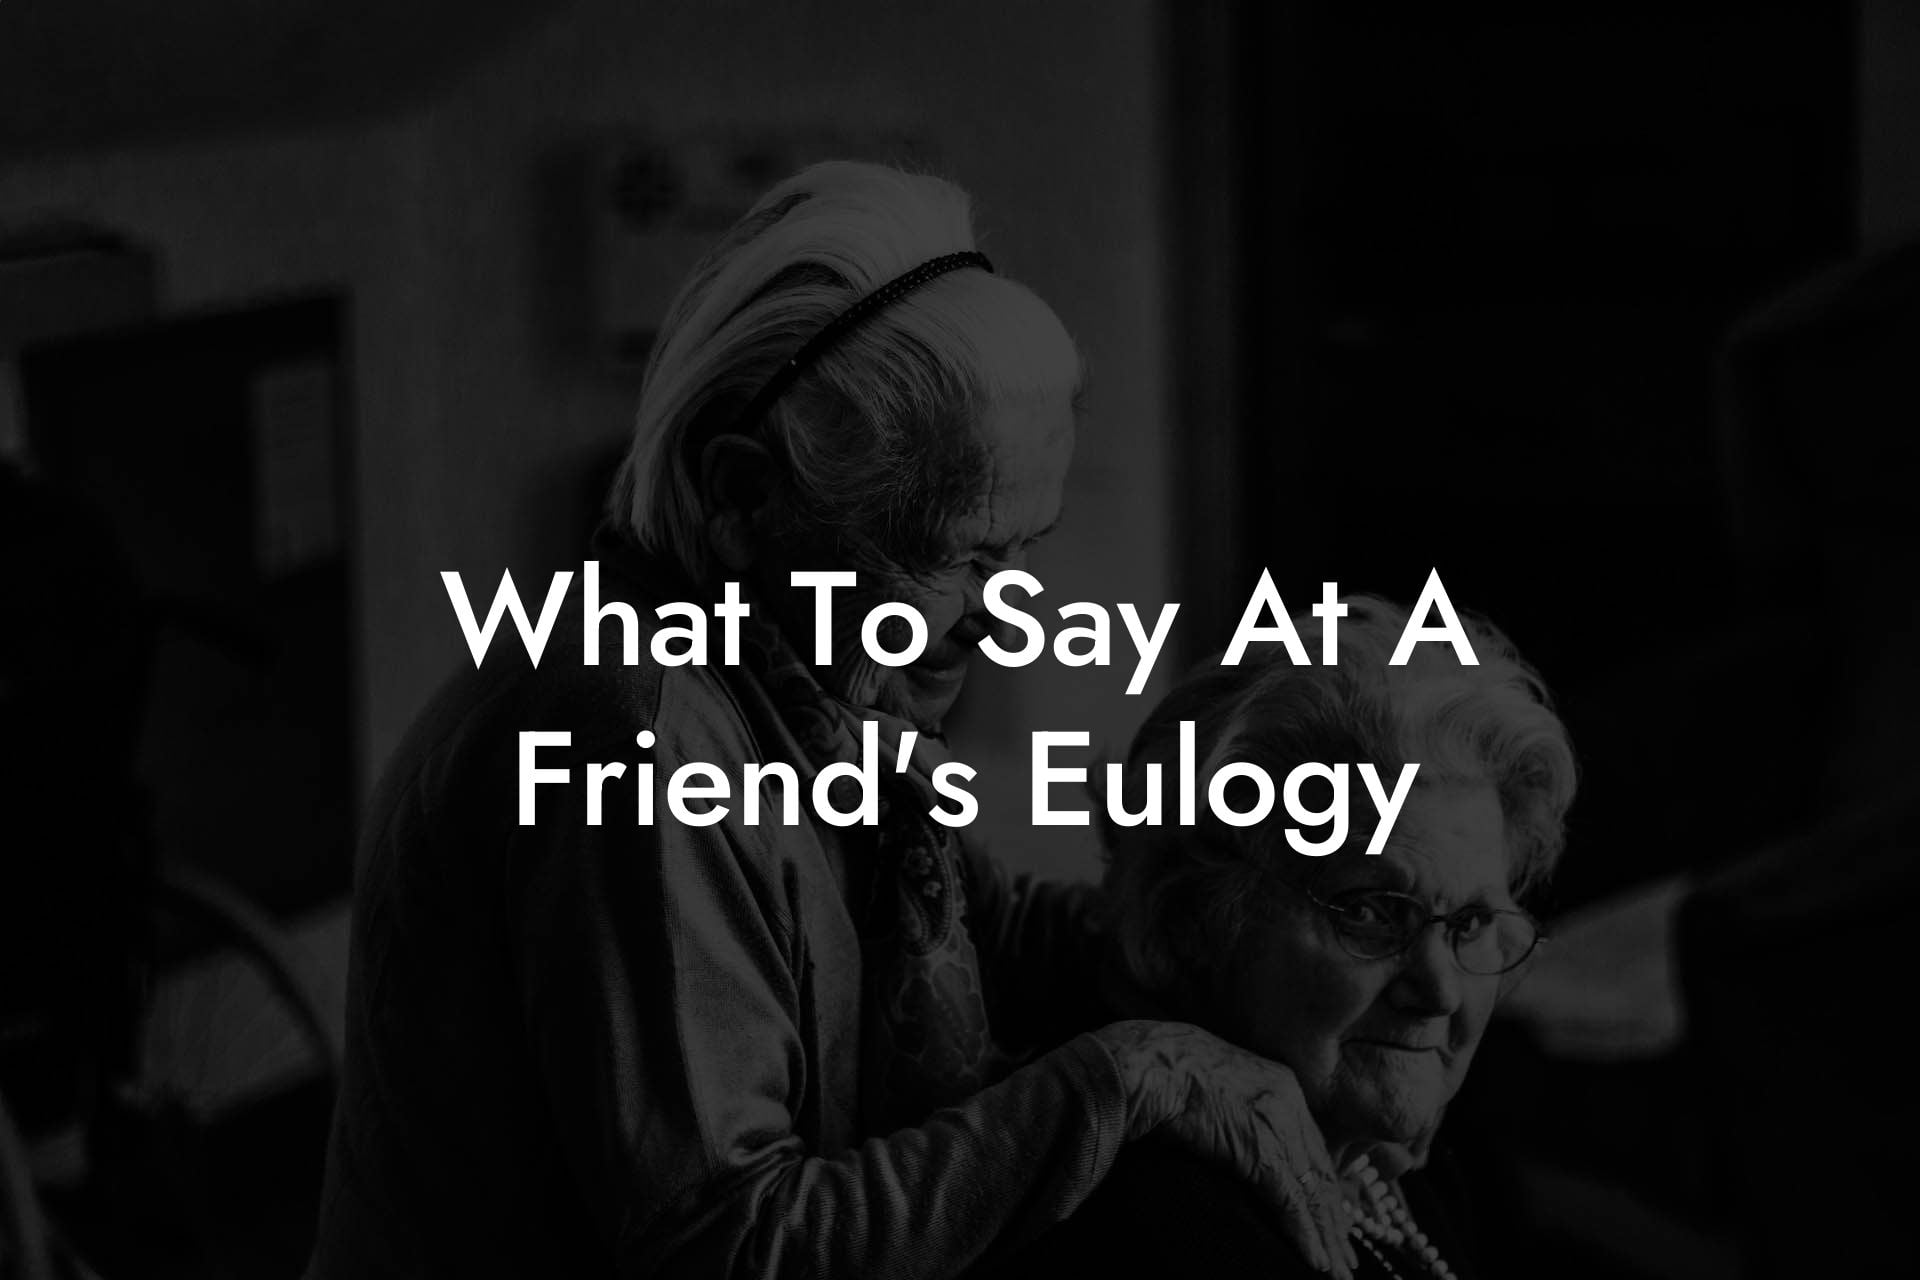 What To Say At A Friend's Eulogy